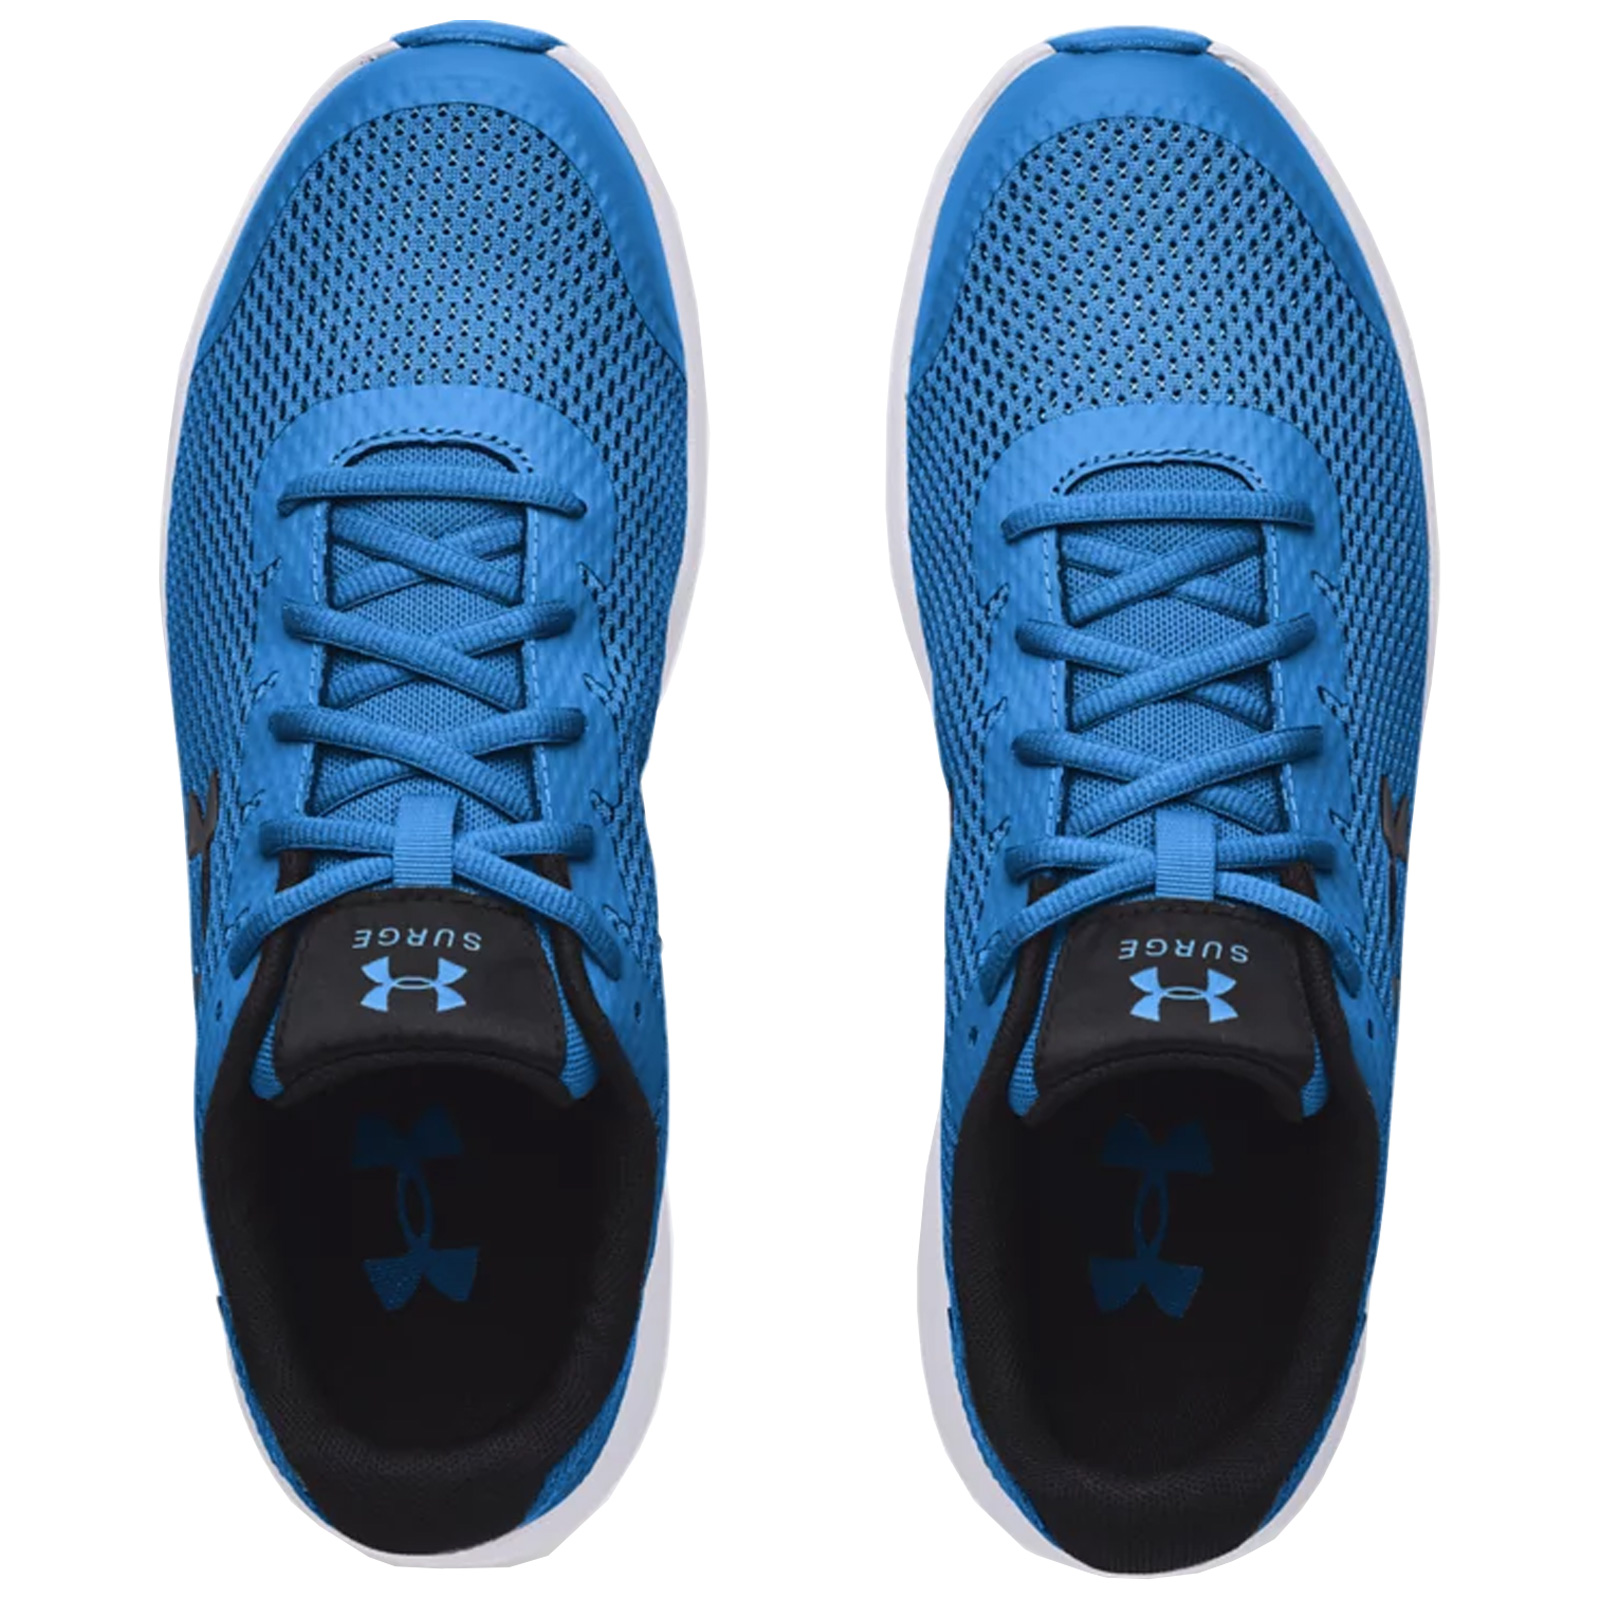 Under Armour Mens Surge 2 Trainers UA Gym Running Shoes Walking Training | eBay